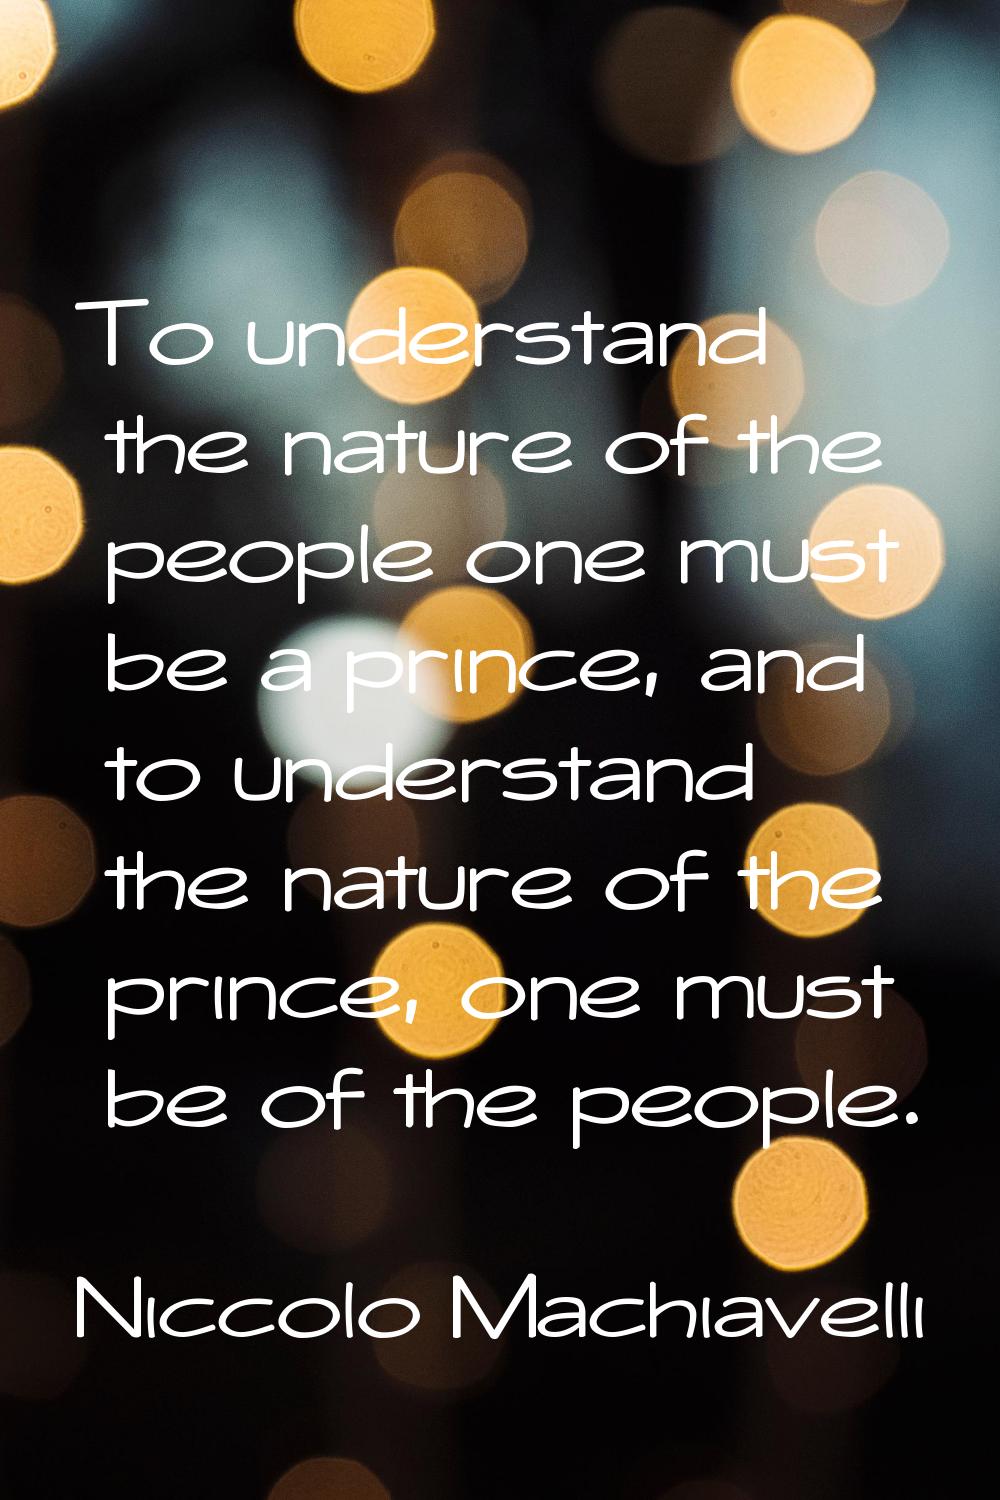 To understand the nature of the people one must be a prince, and to understand the nature of the pr